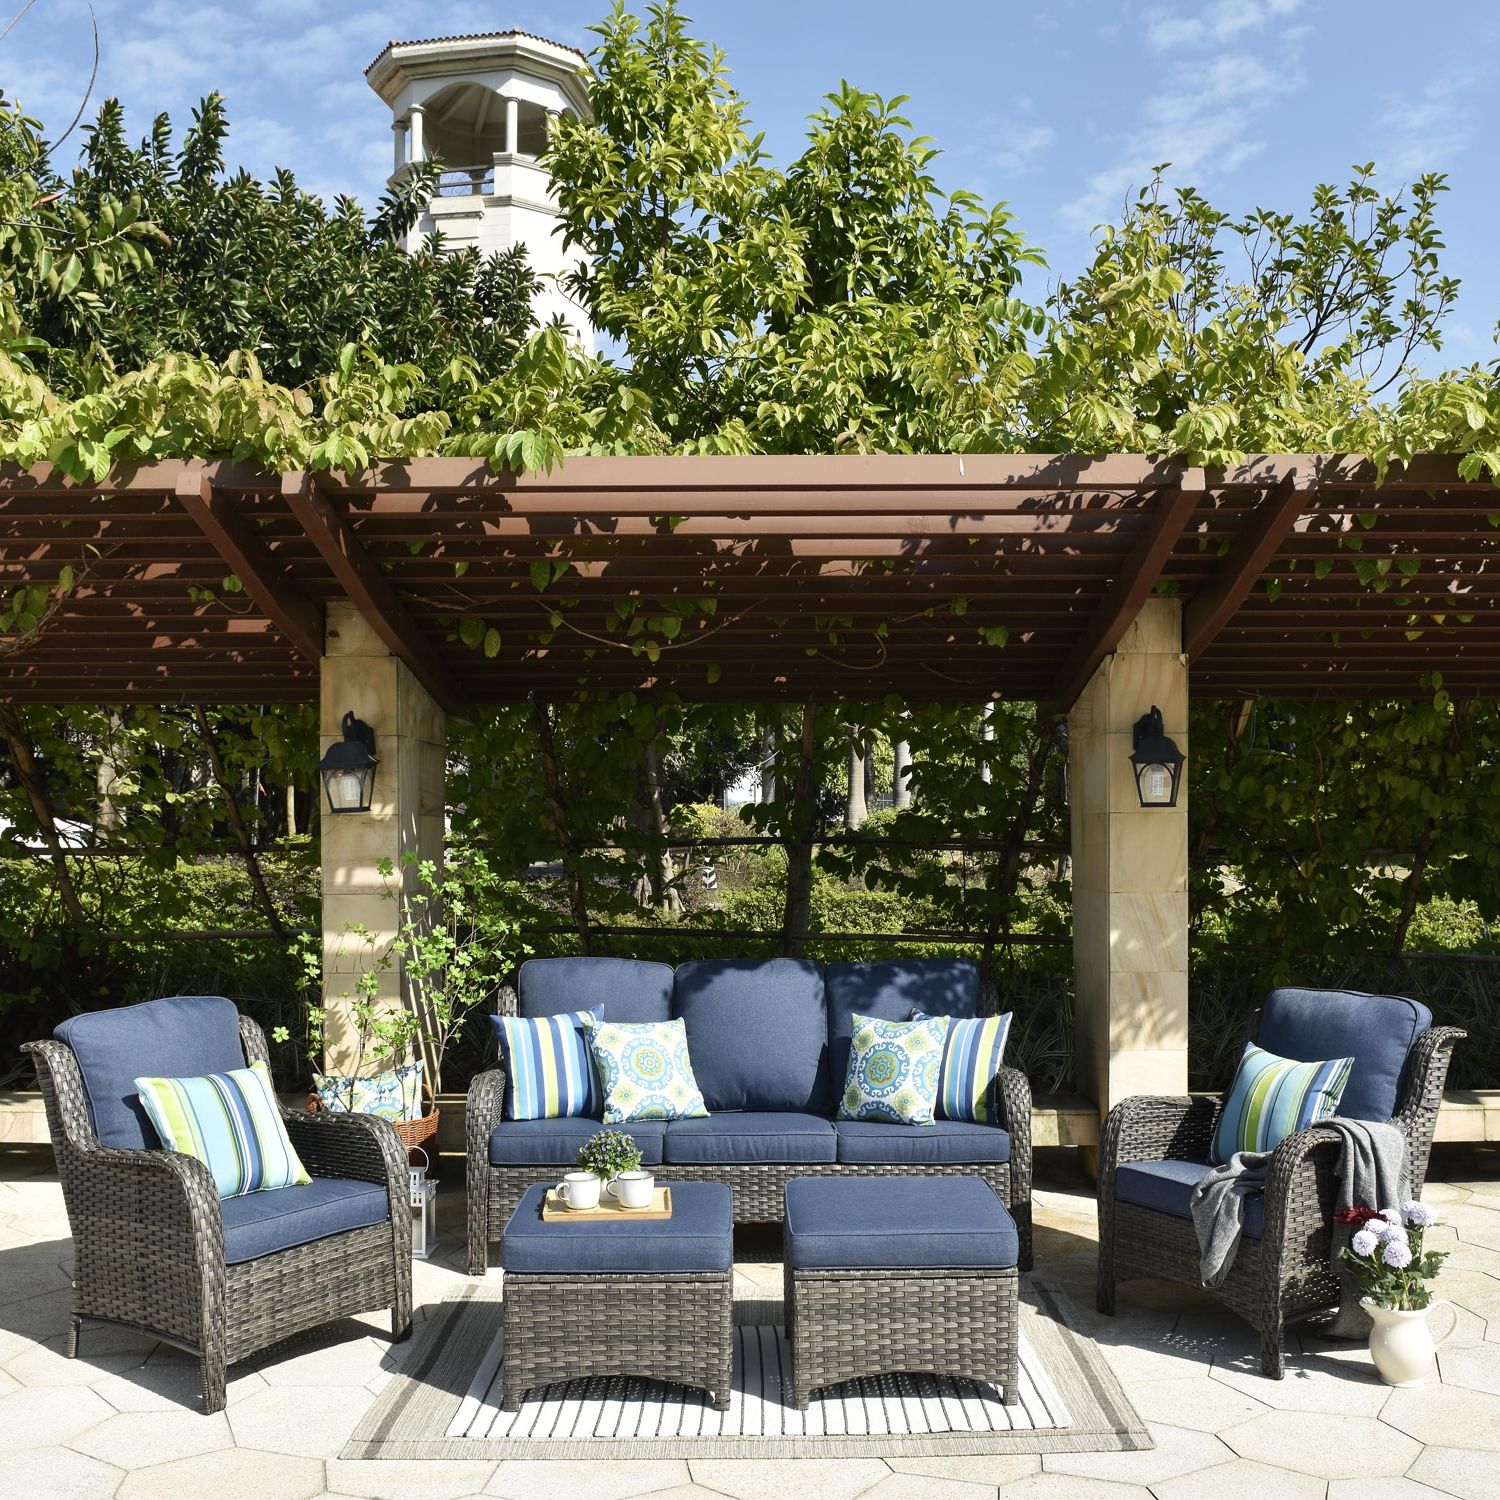 5 Piece Patio Conversation Set Pertaining To Best And Newest Ovios 5 Piece Rattan Patio Conversation Set With Blue Cushions In The Patio  Conversation Sets Department At Lowes (Photo 2 of 16)